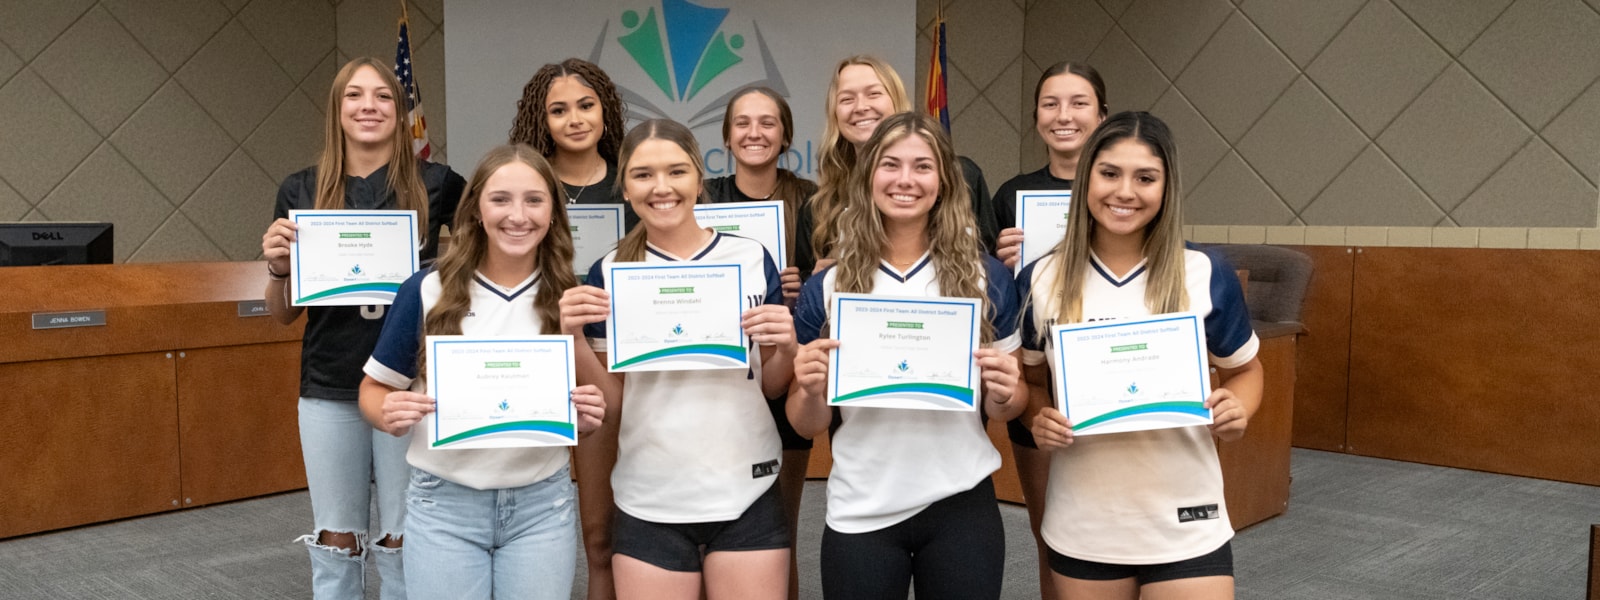 Softball players holding their certificates and smiling for the camera